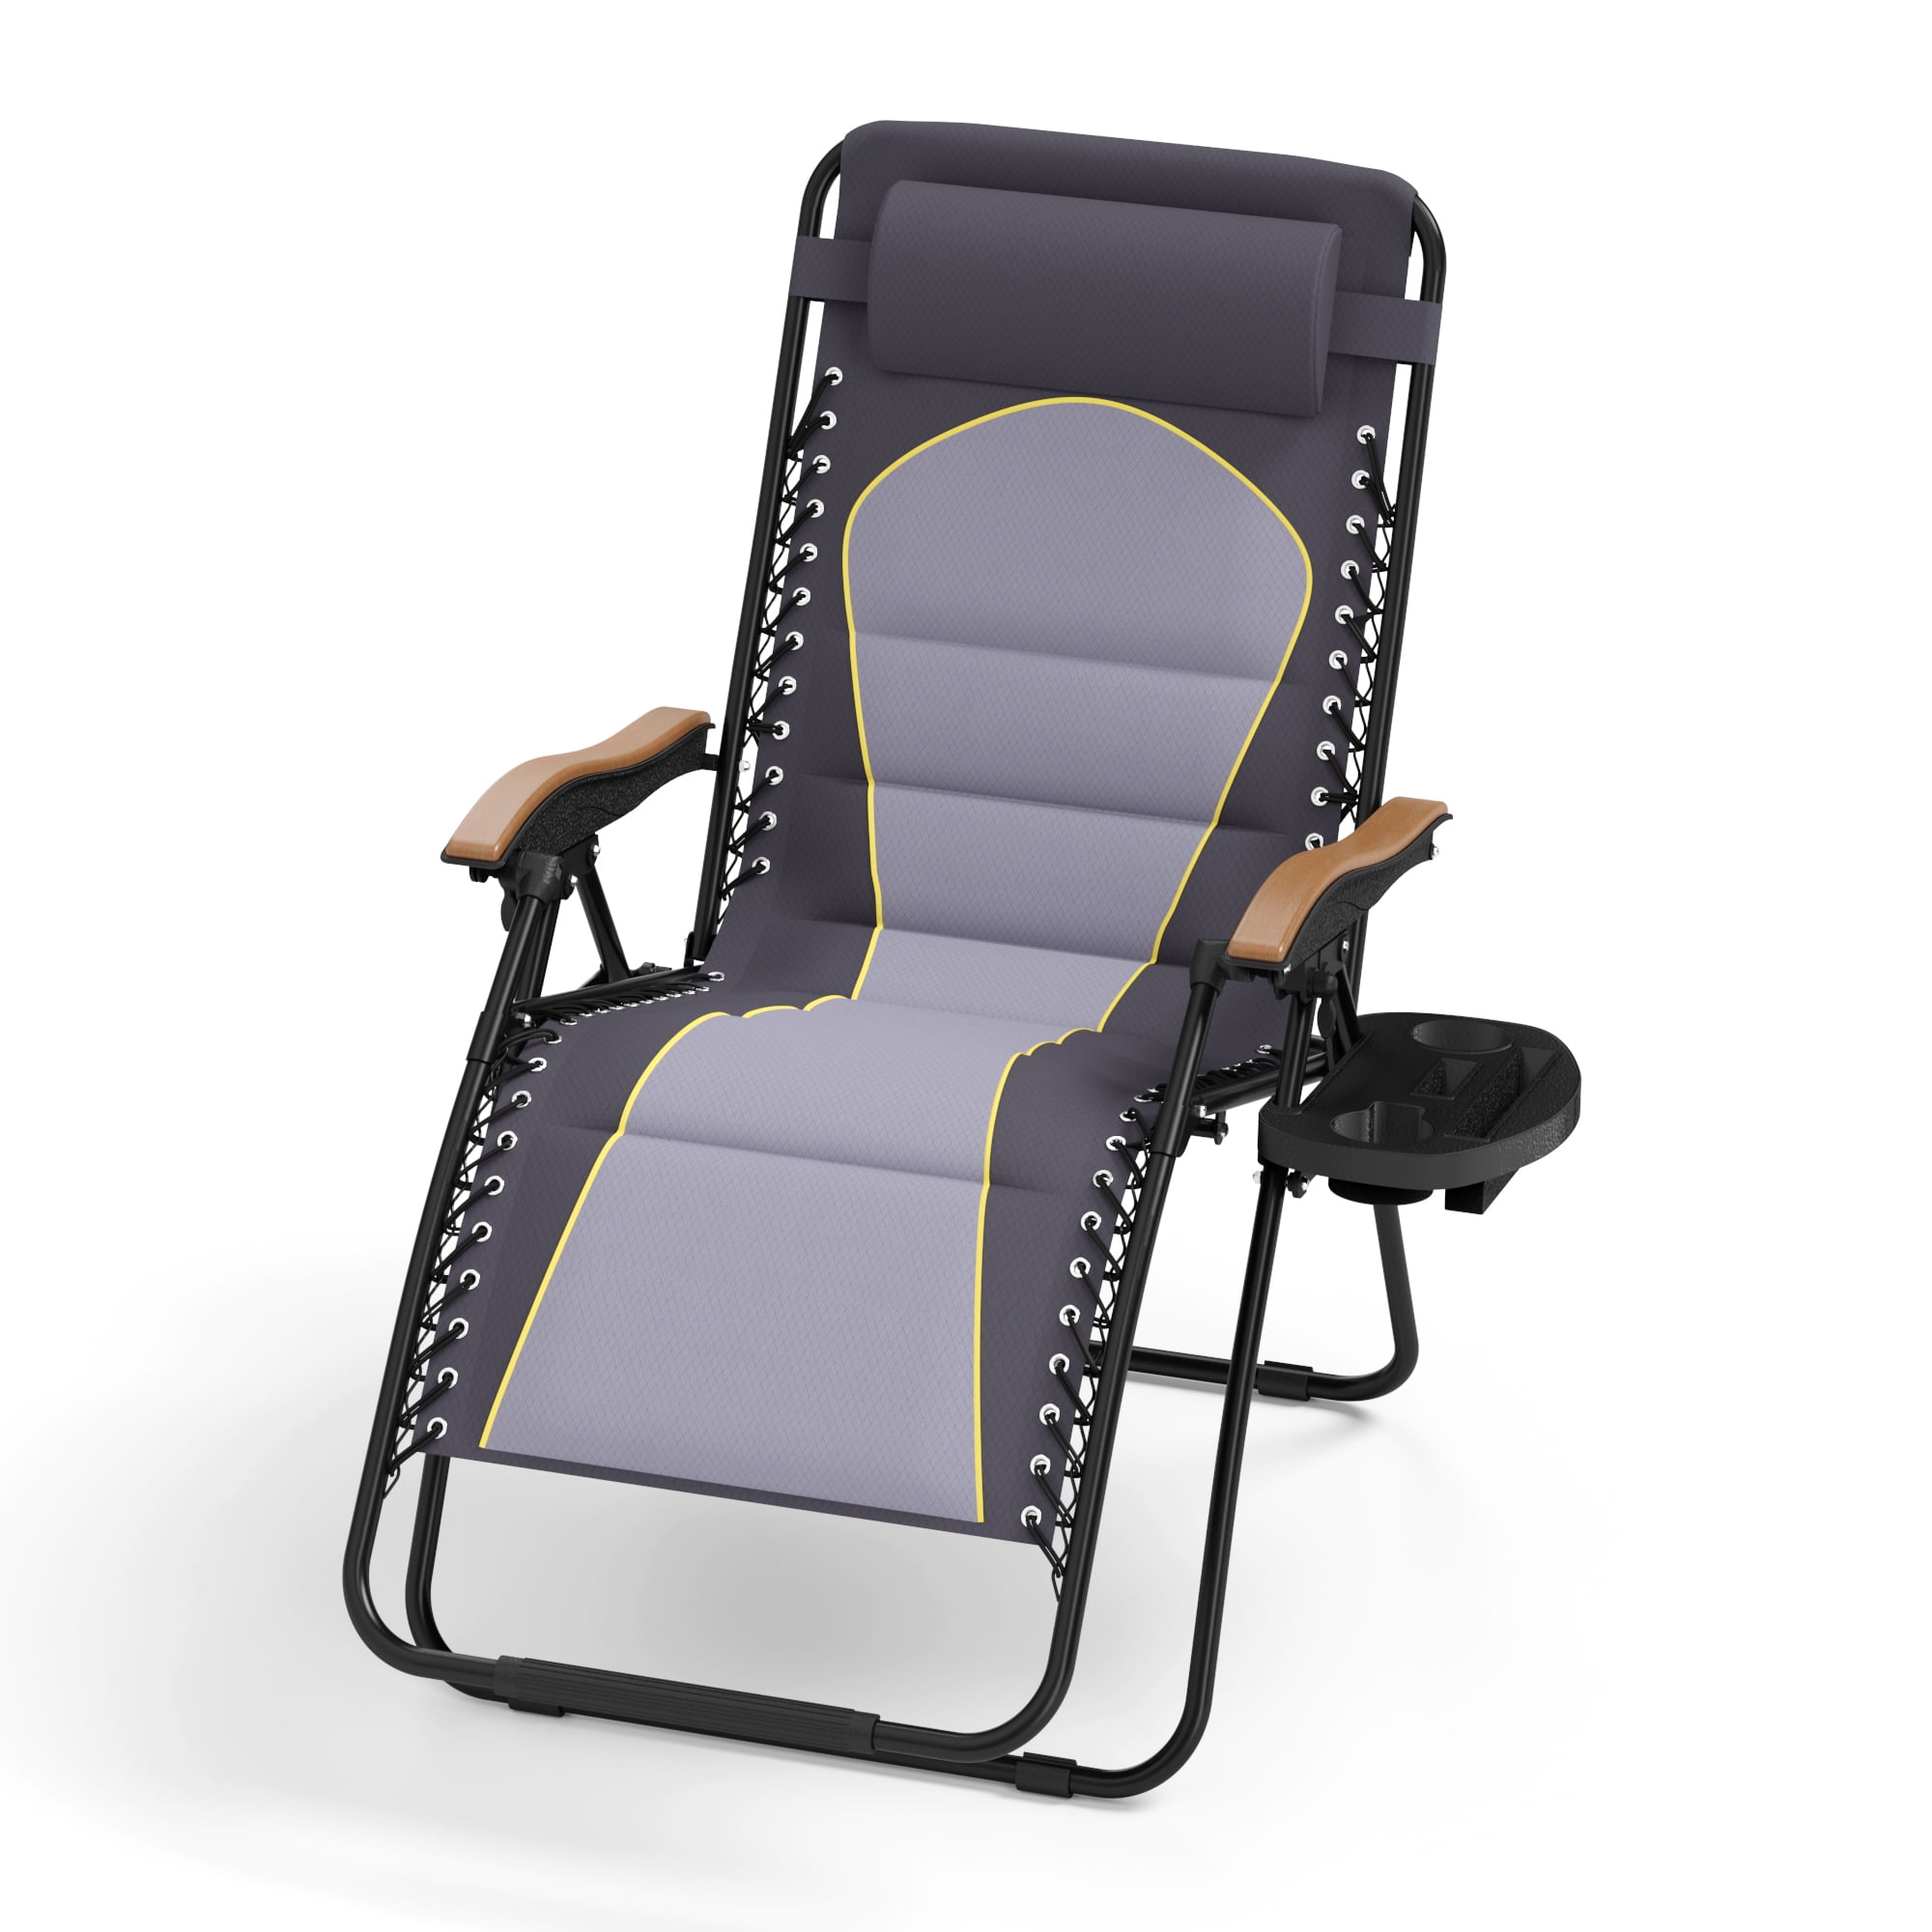 Kalvn Zero Gravity Reclining Chair, Folding and Portable with Detachable Cushion, Headrest and Cup Holder Arlmont & Co. Color: Dark Gray/Black